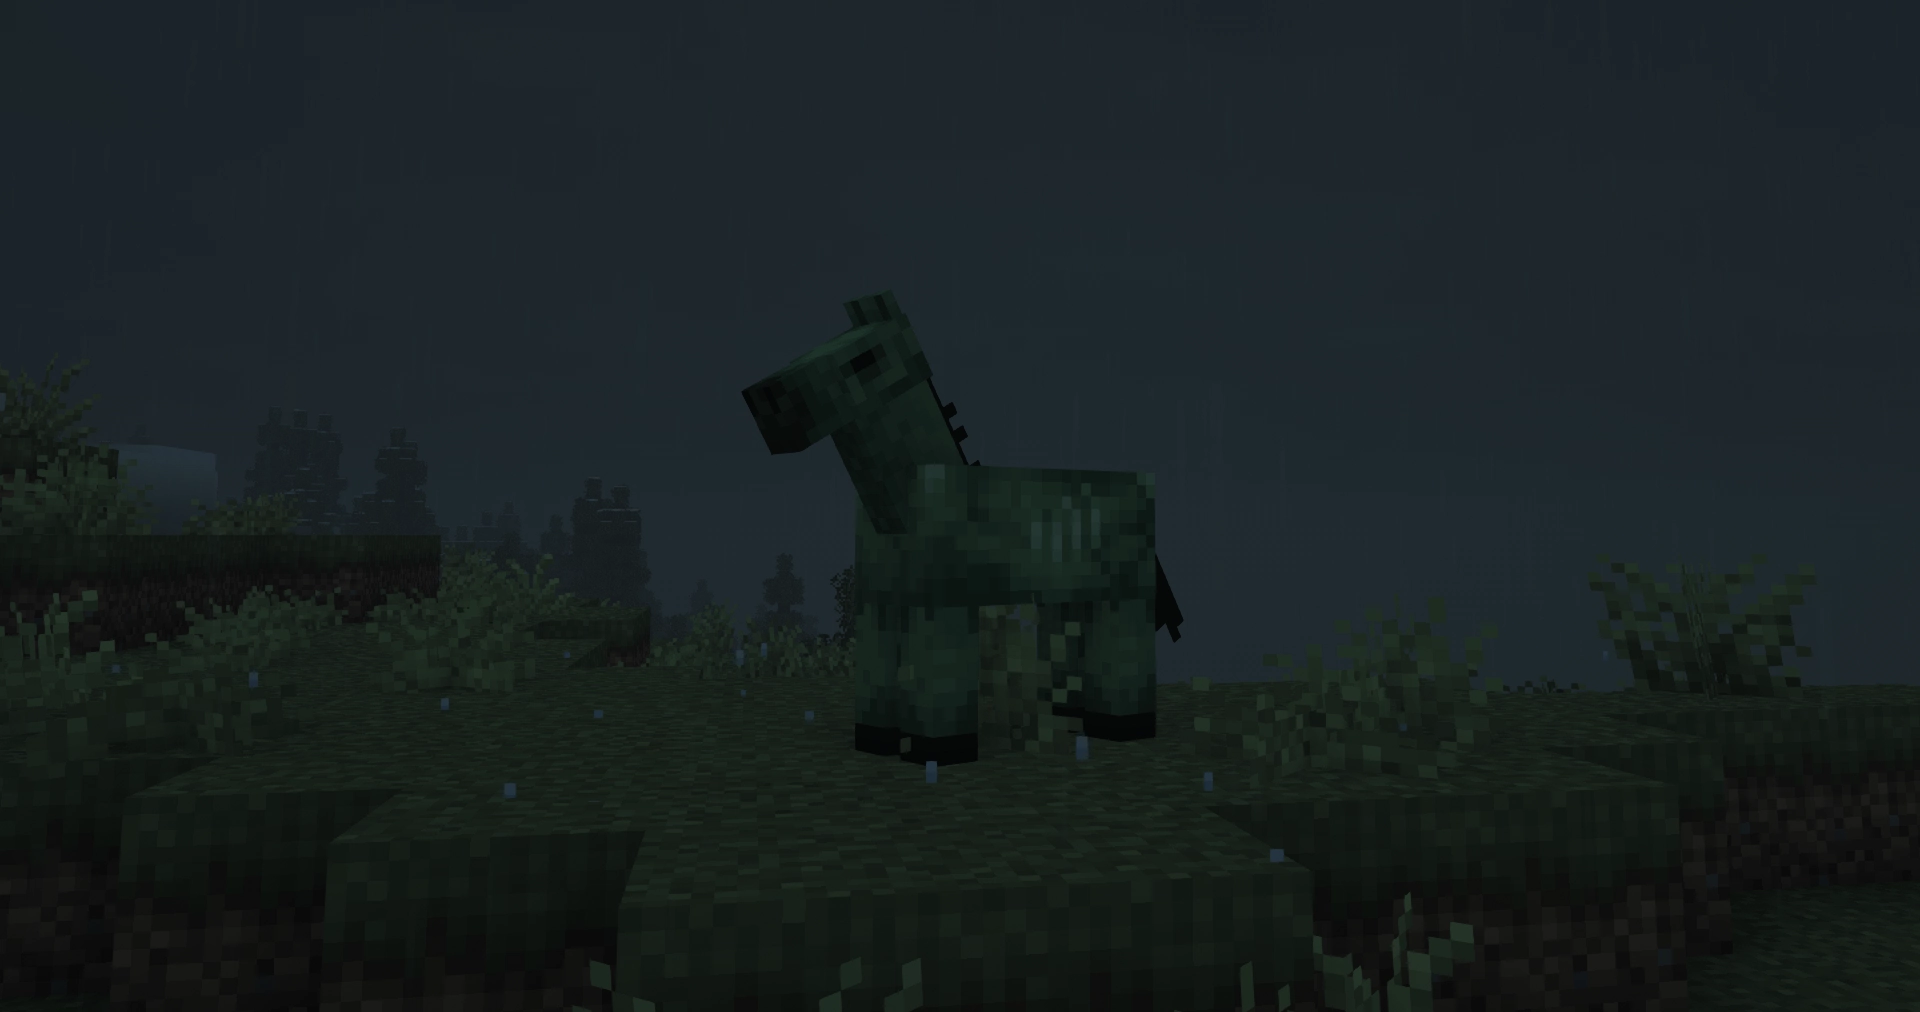 Zombie Horse during thunderstorm